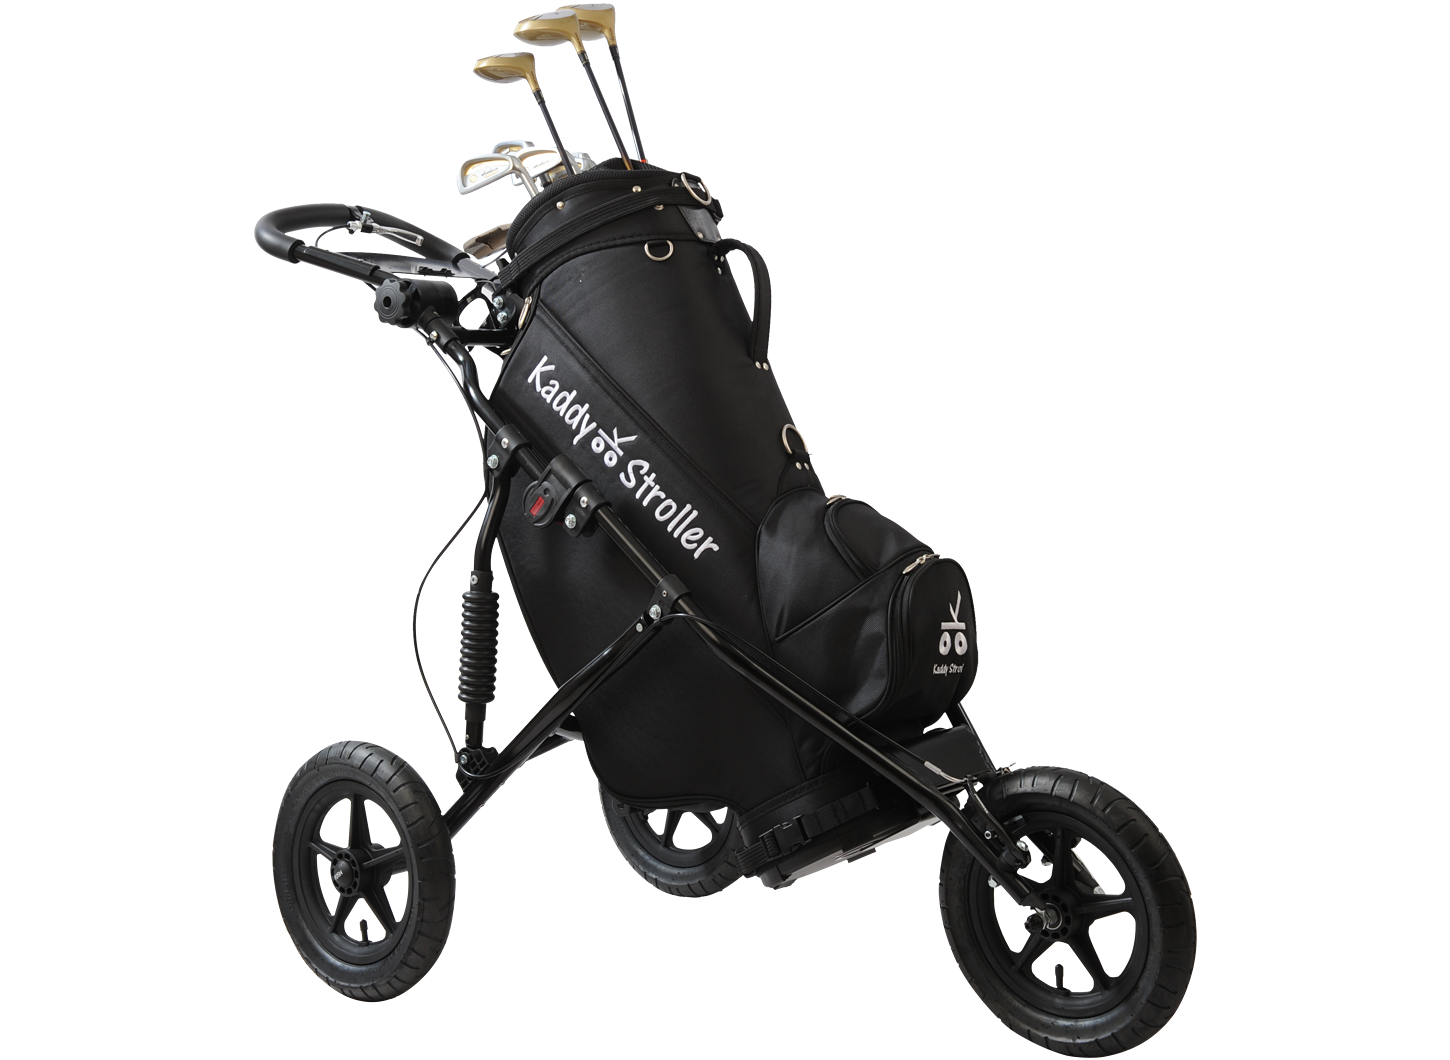 baby stroller for golf course